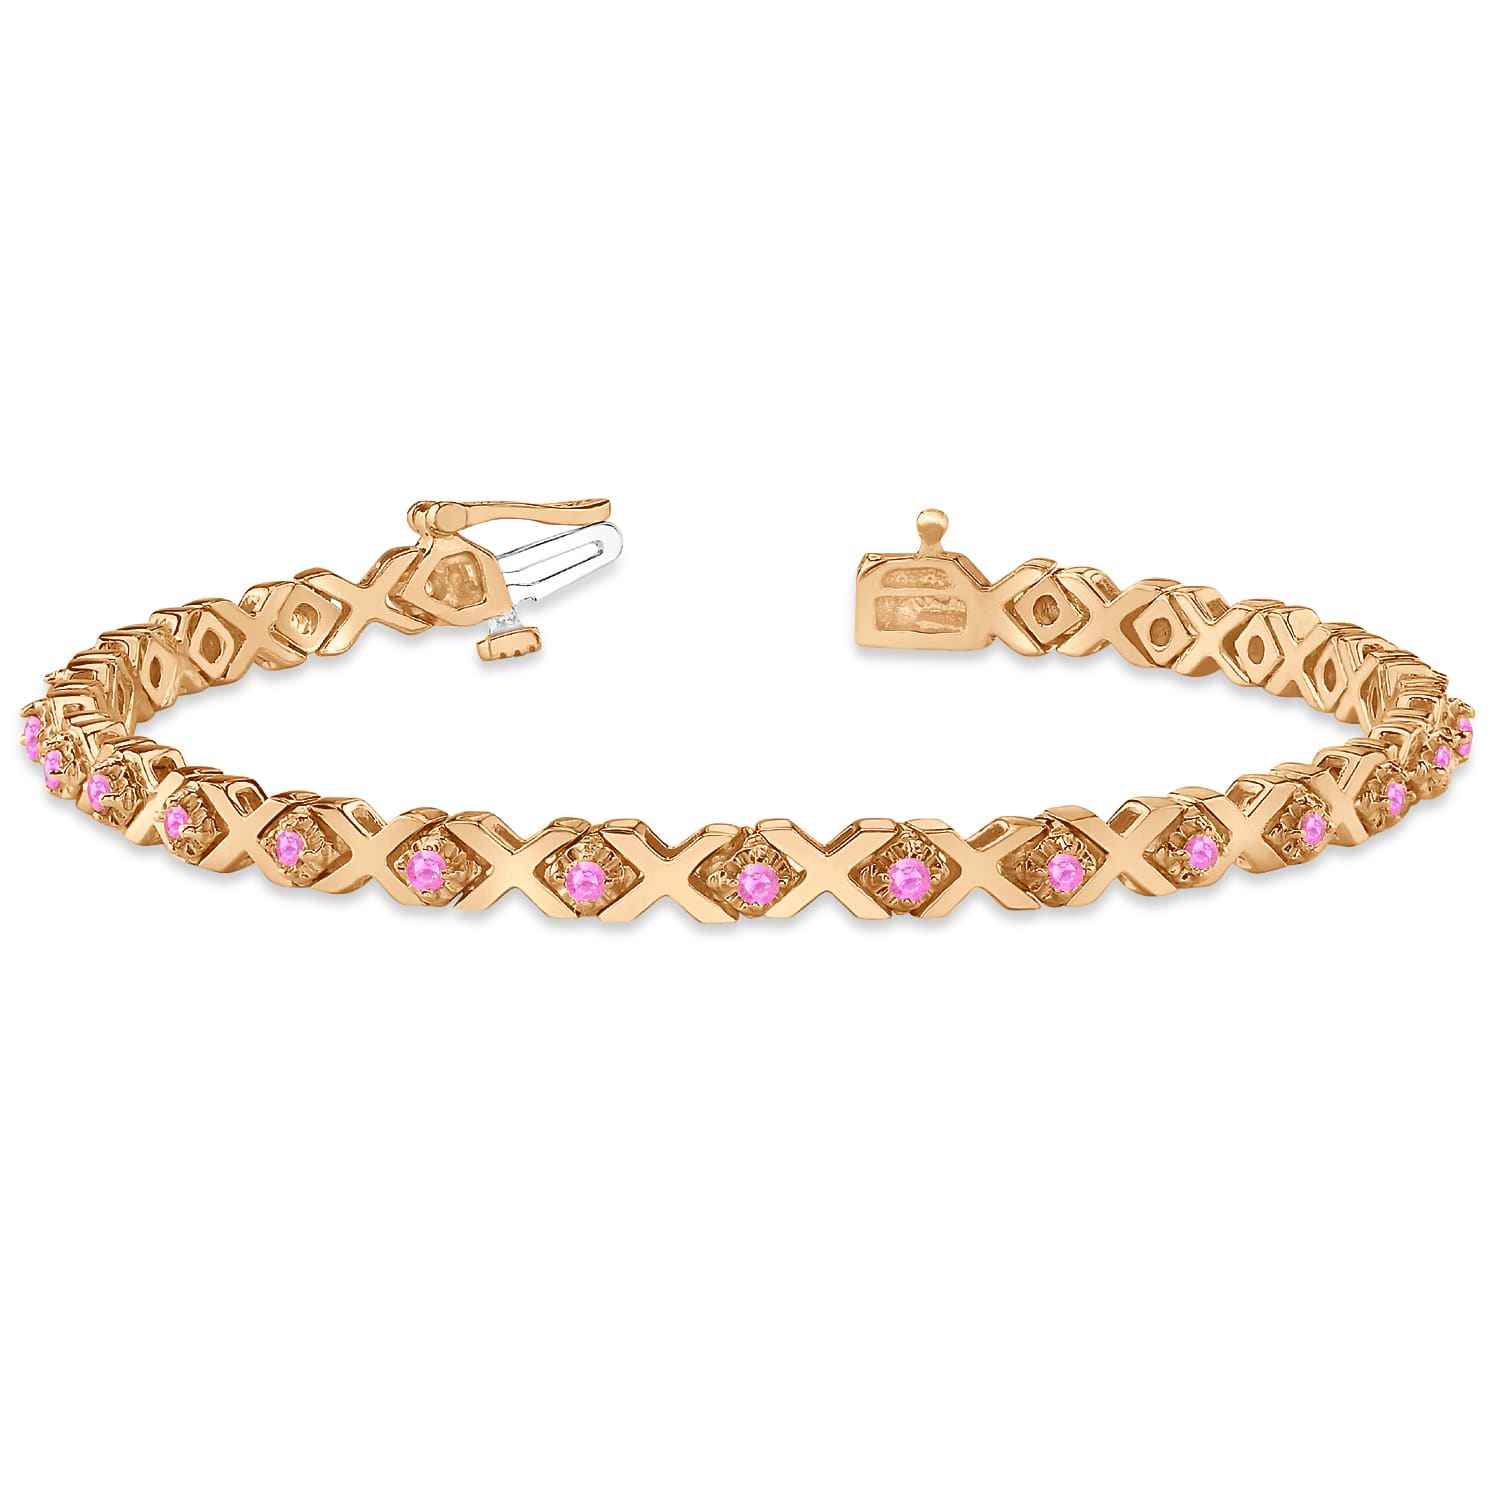 Pink Sapphire XOXO Chained Line Bracelet 14k Rose Gold (1.50ct)